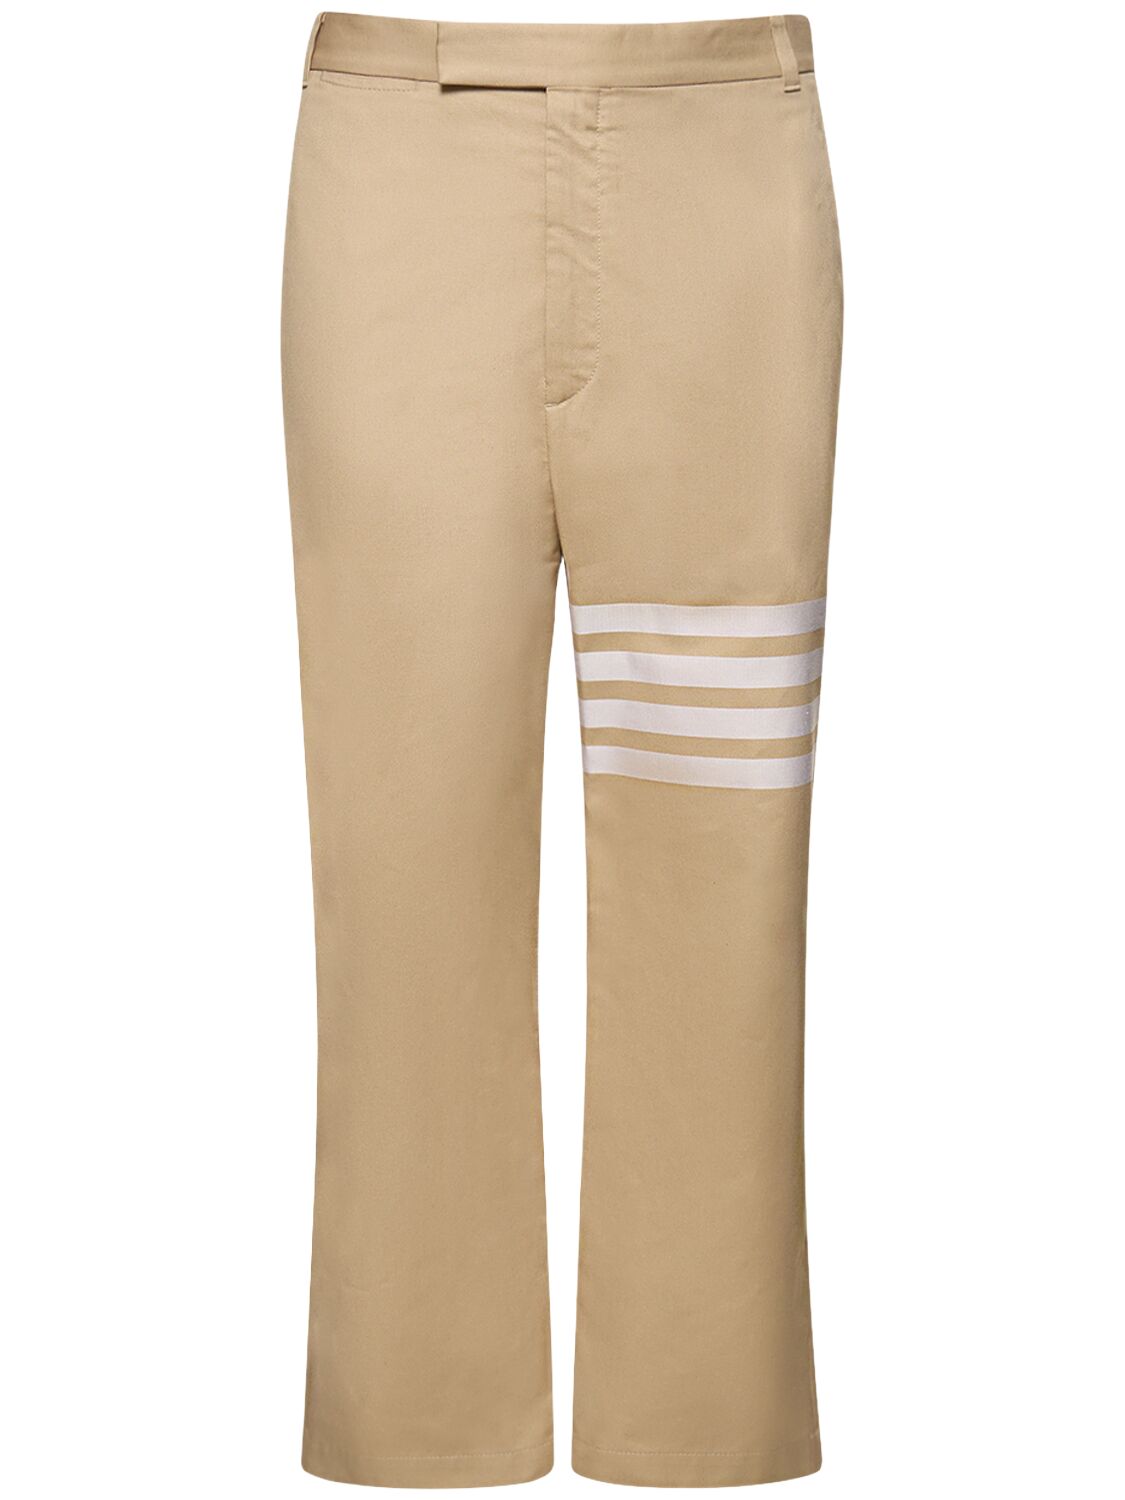 Image of Unconstructed Straight Leg Cotton Pants